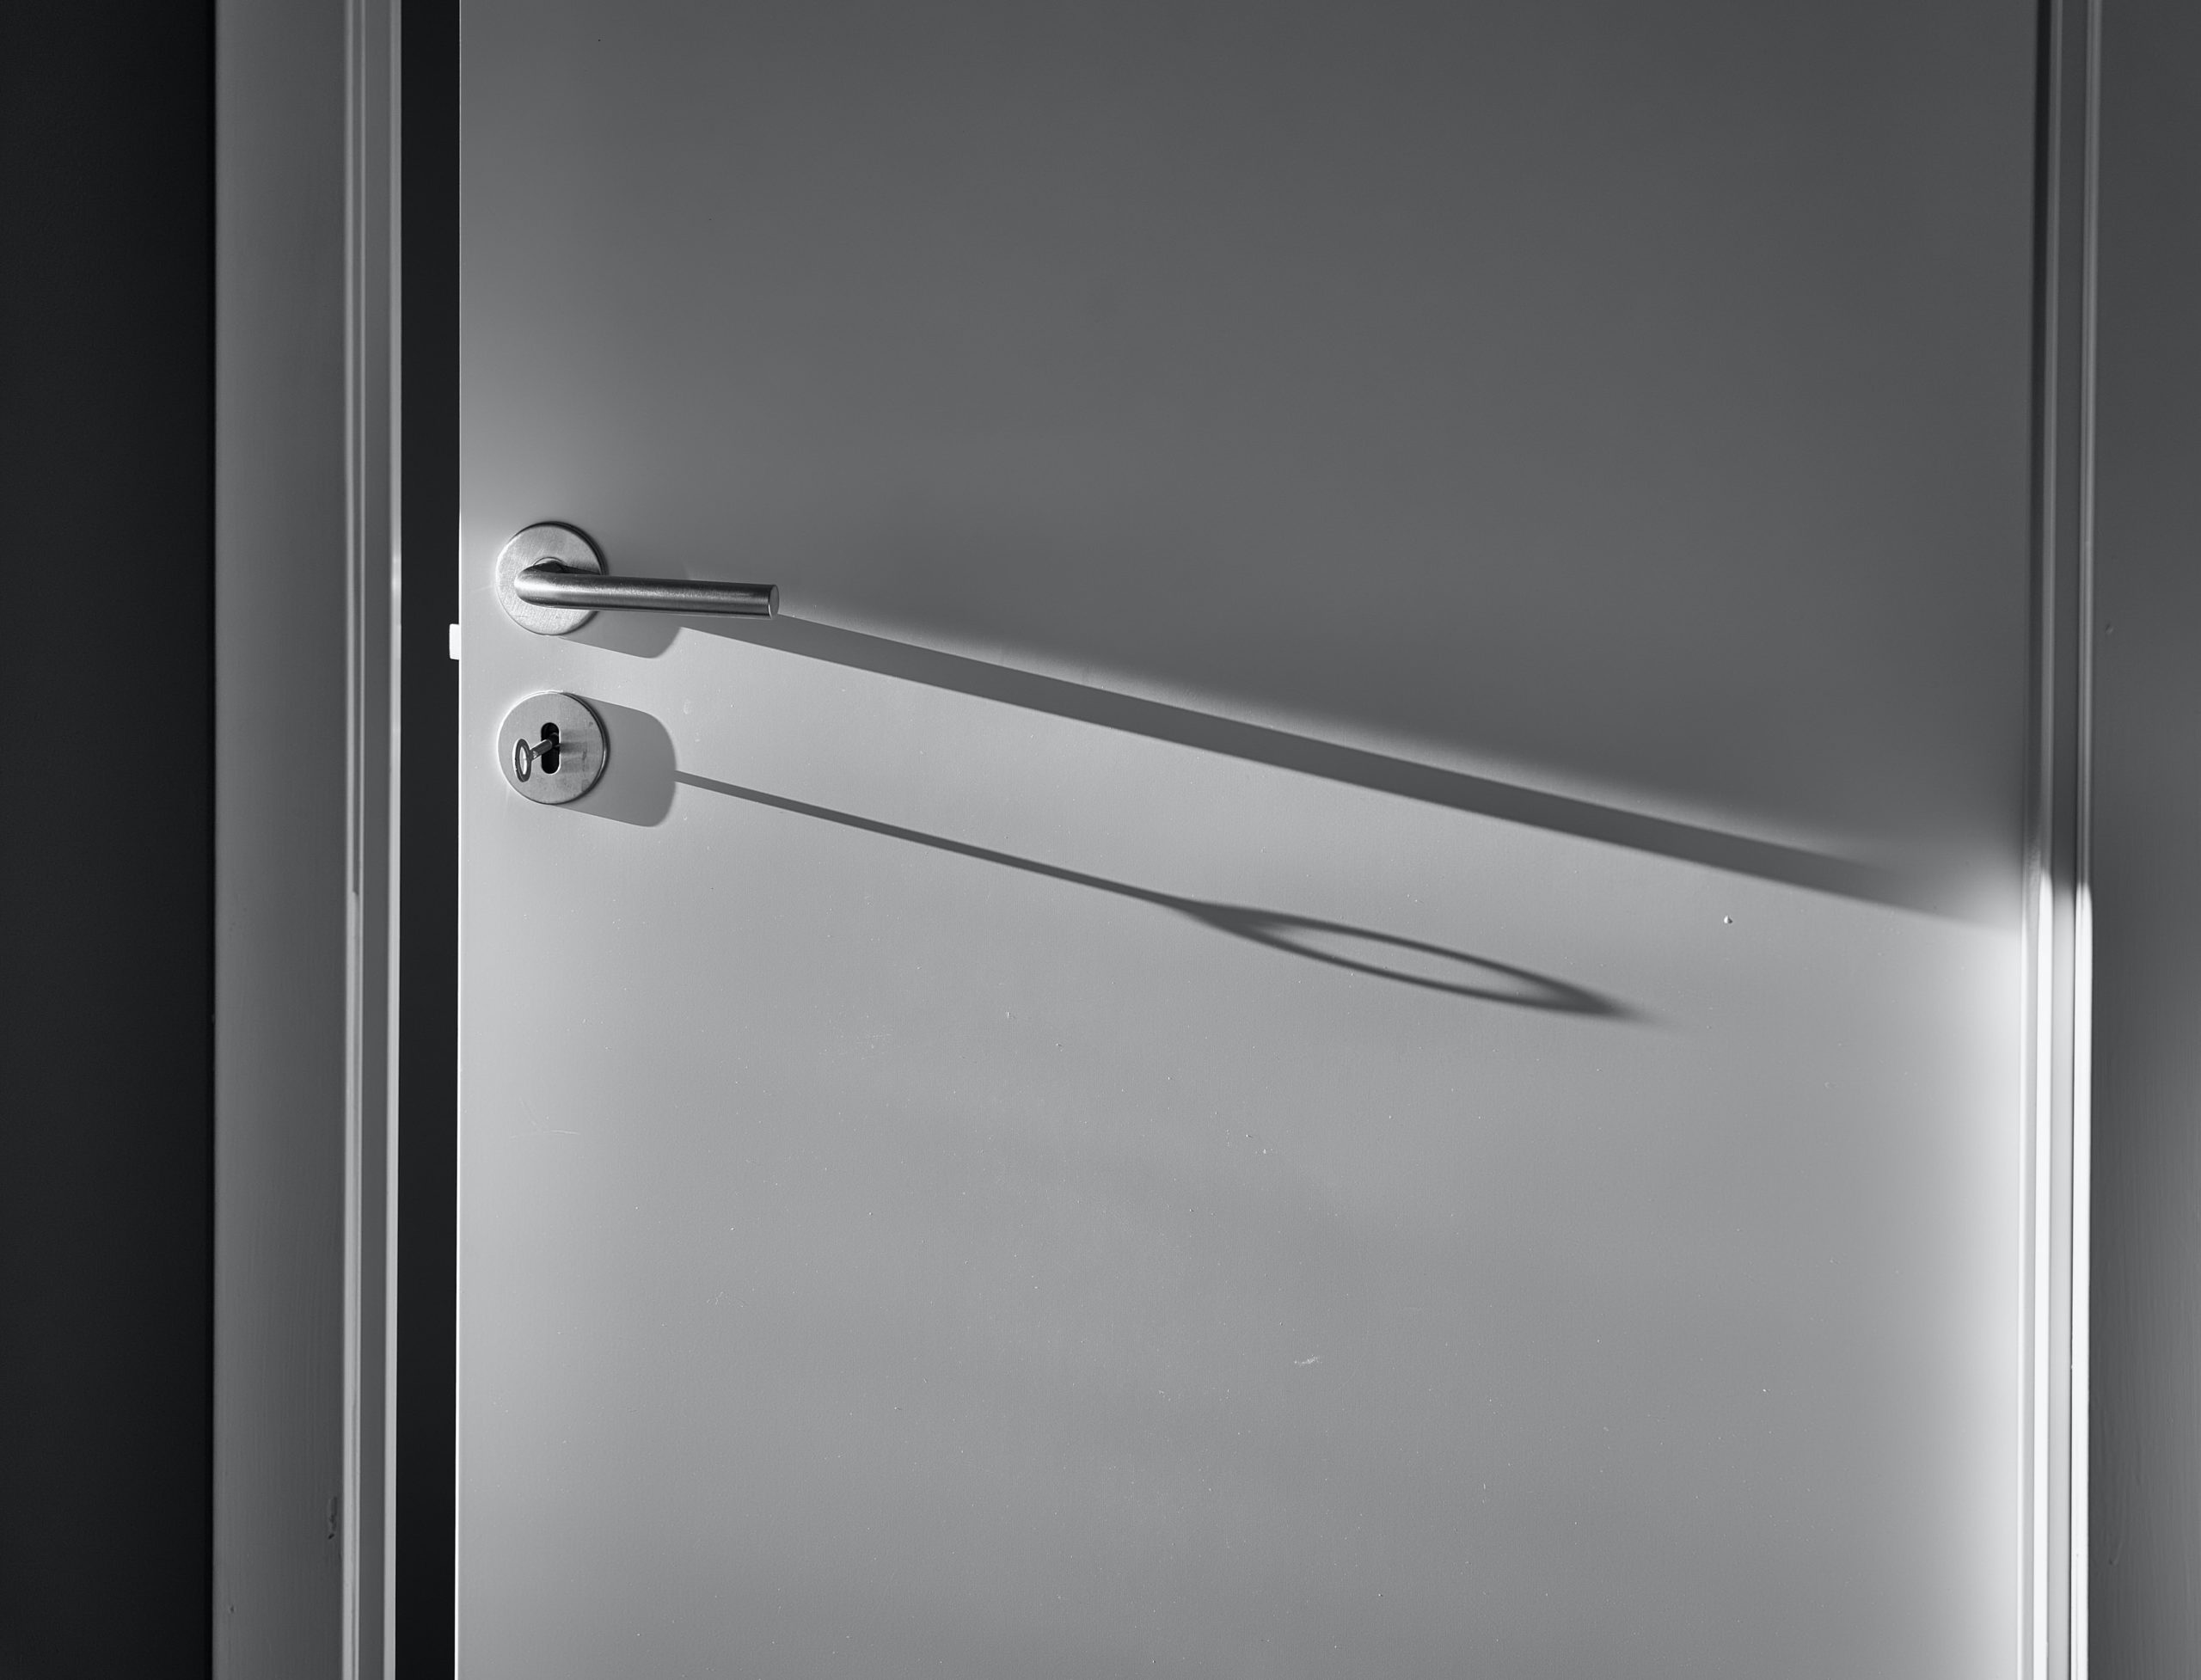 What To Contemplate When Selecting One Of The Best Pocket Door Lock